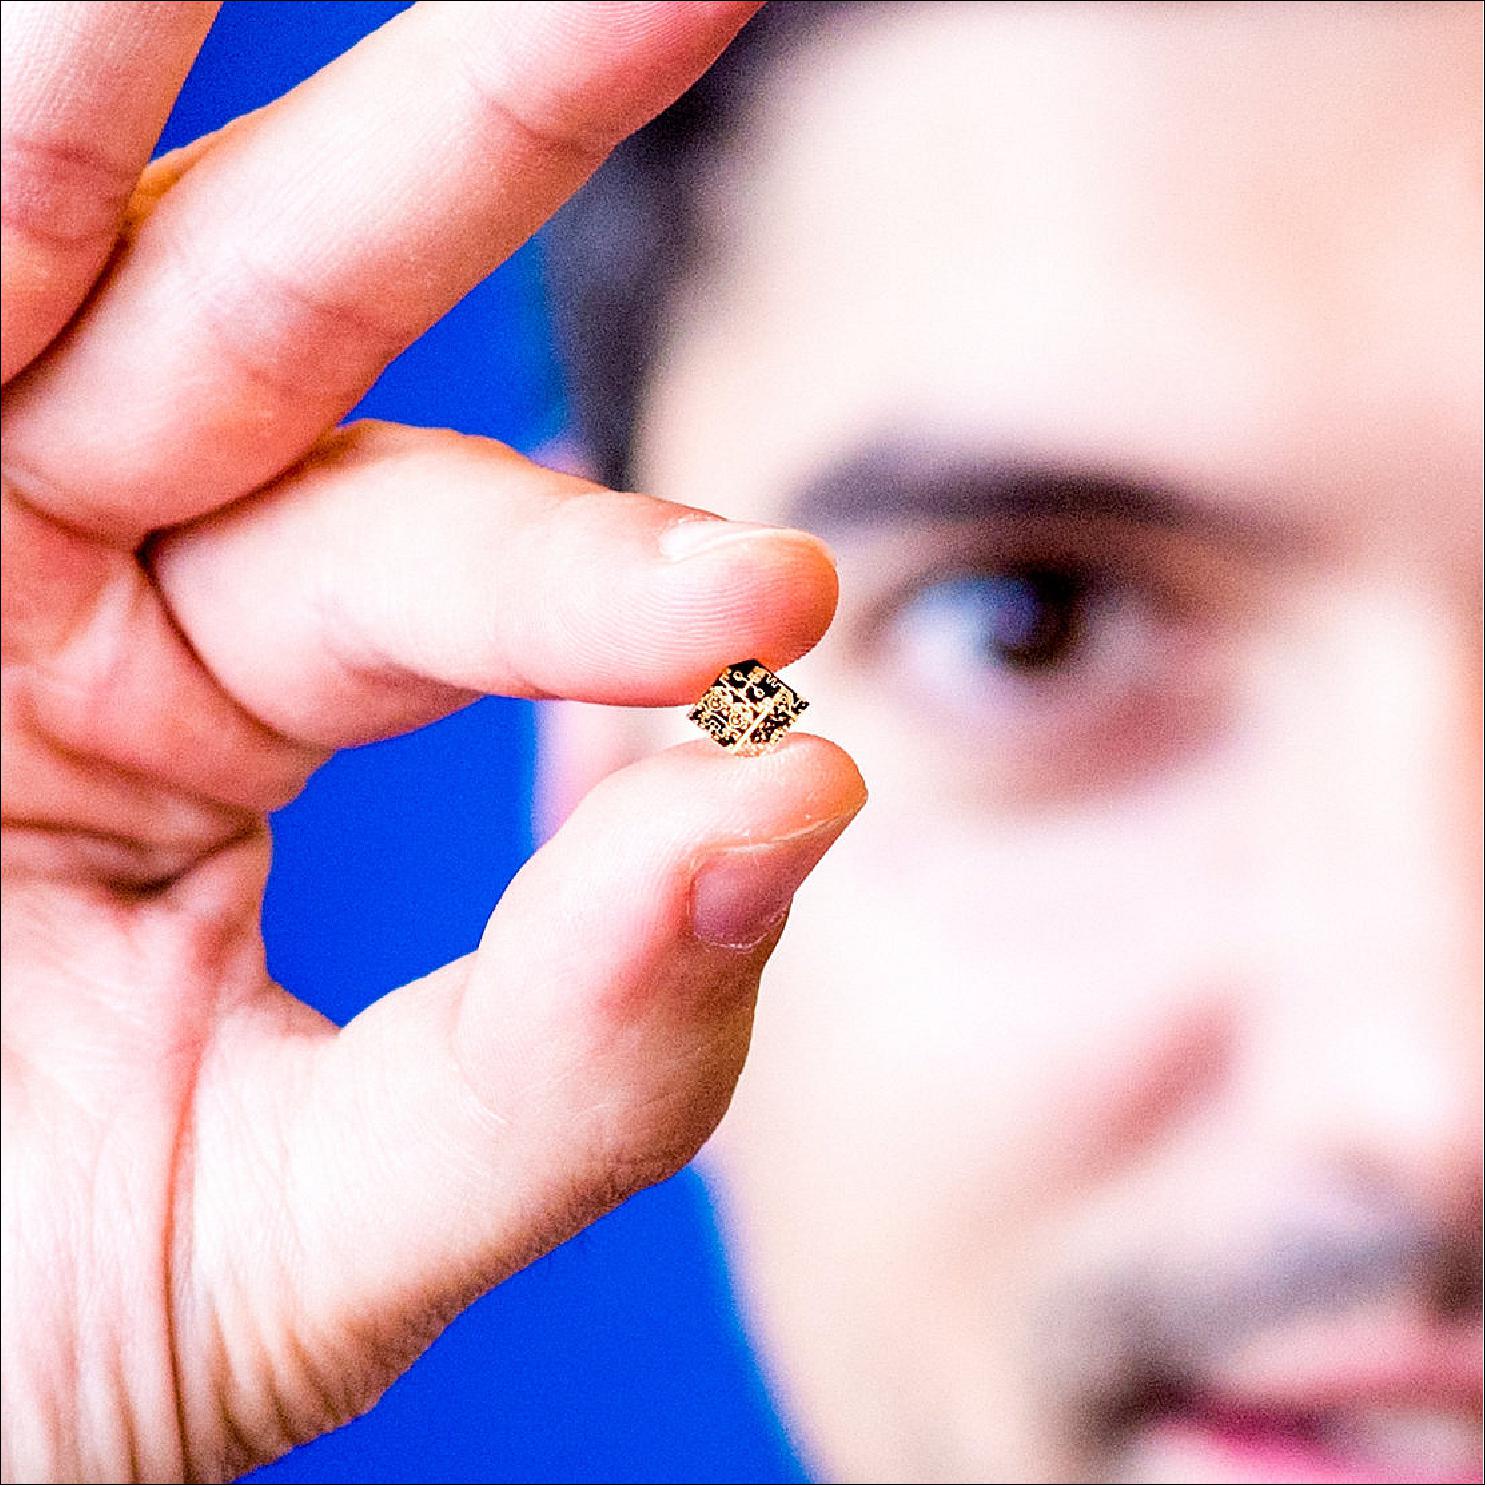 Figure 27: Natanael Ayllon, ESA payload engineer, showing a prototype transmit/receive module on a single chip (image credit: ESA - SJM Photography)